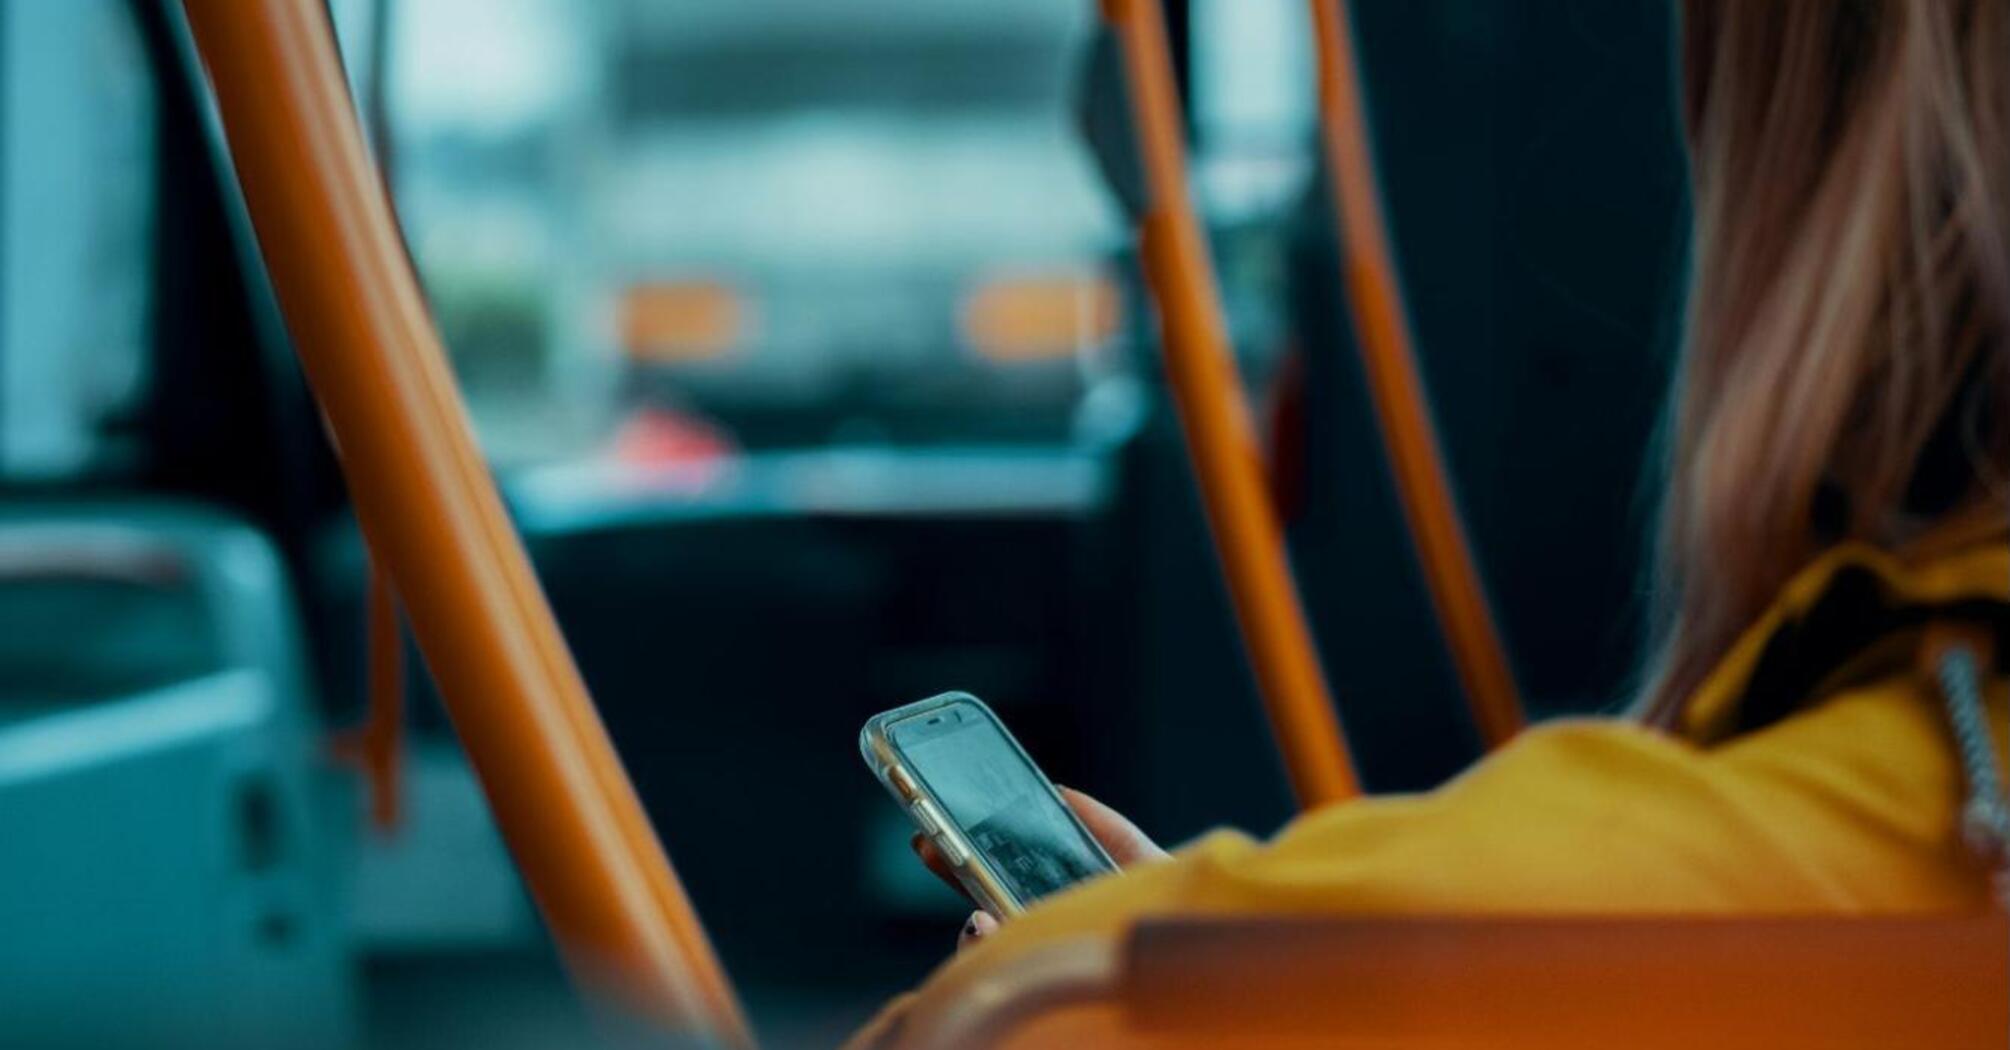 A person wearing a yellow jacket using a smartphone while sitting on a bus